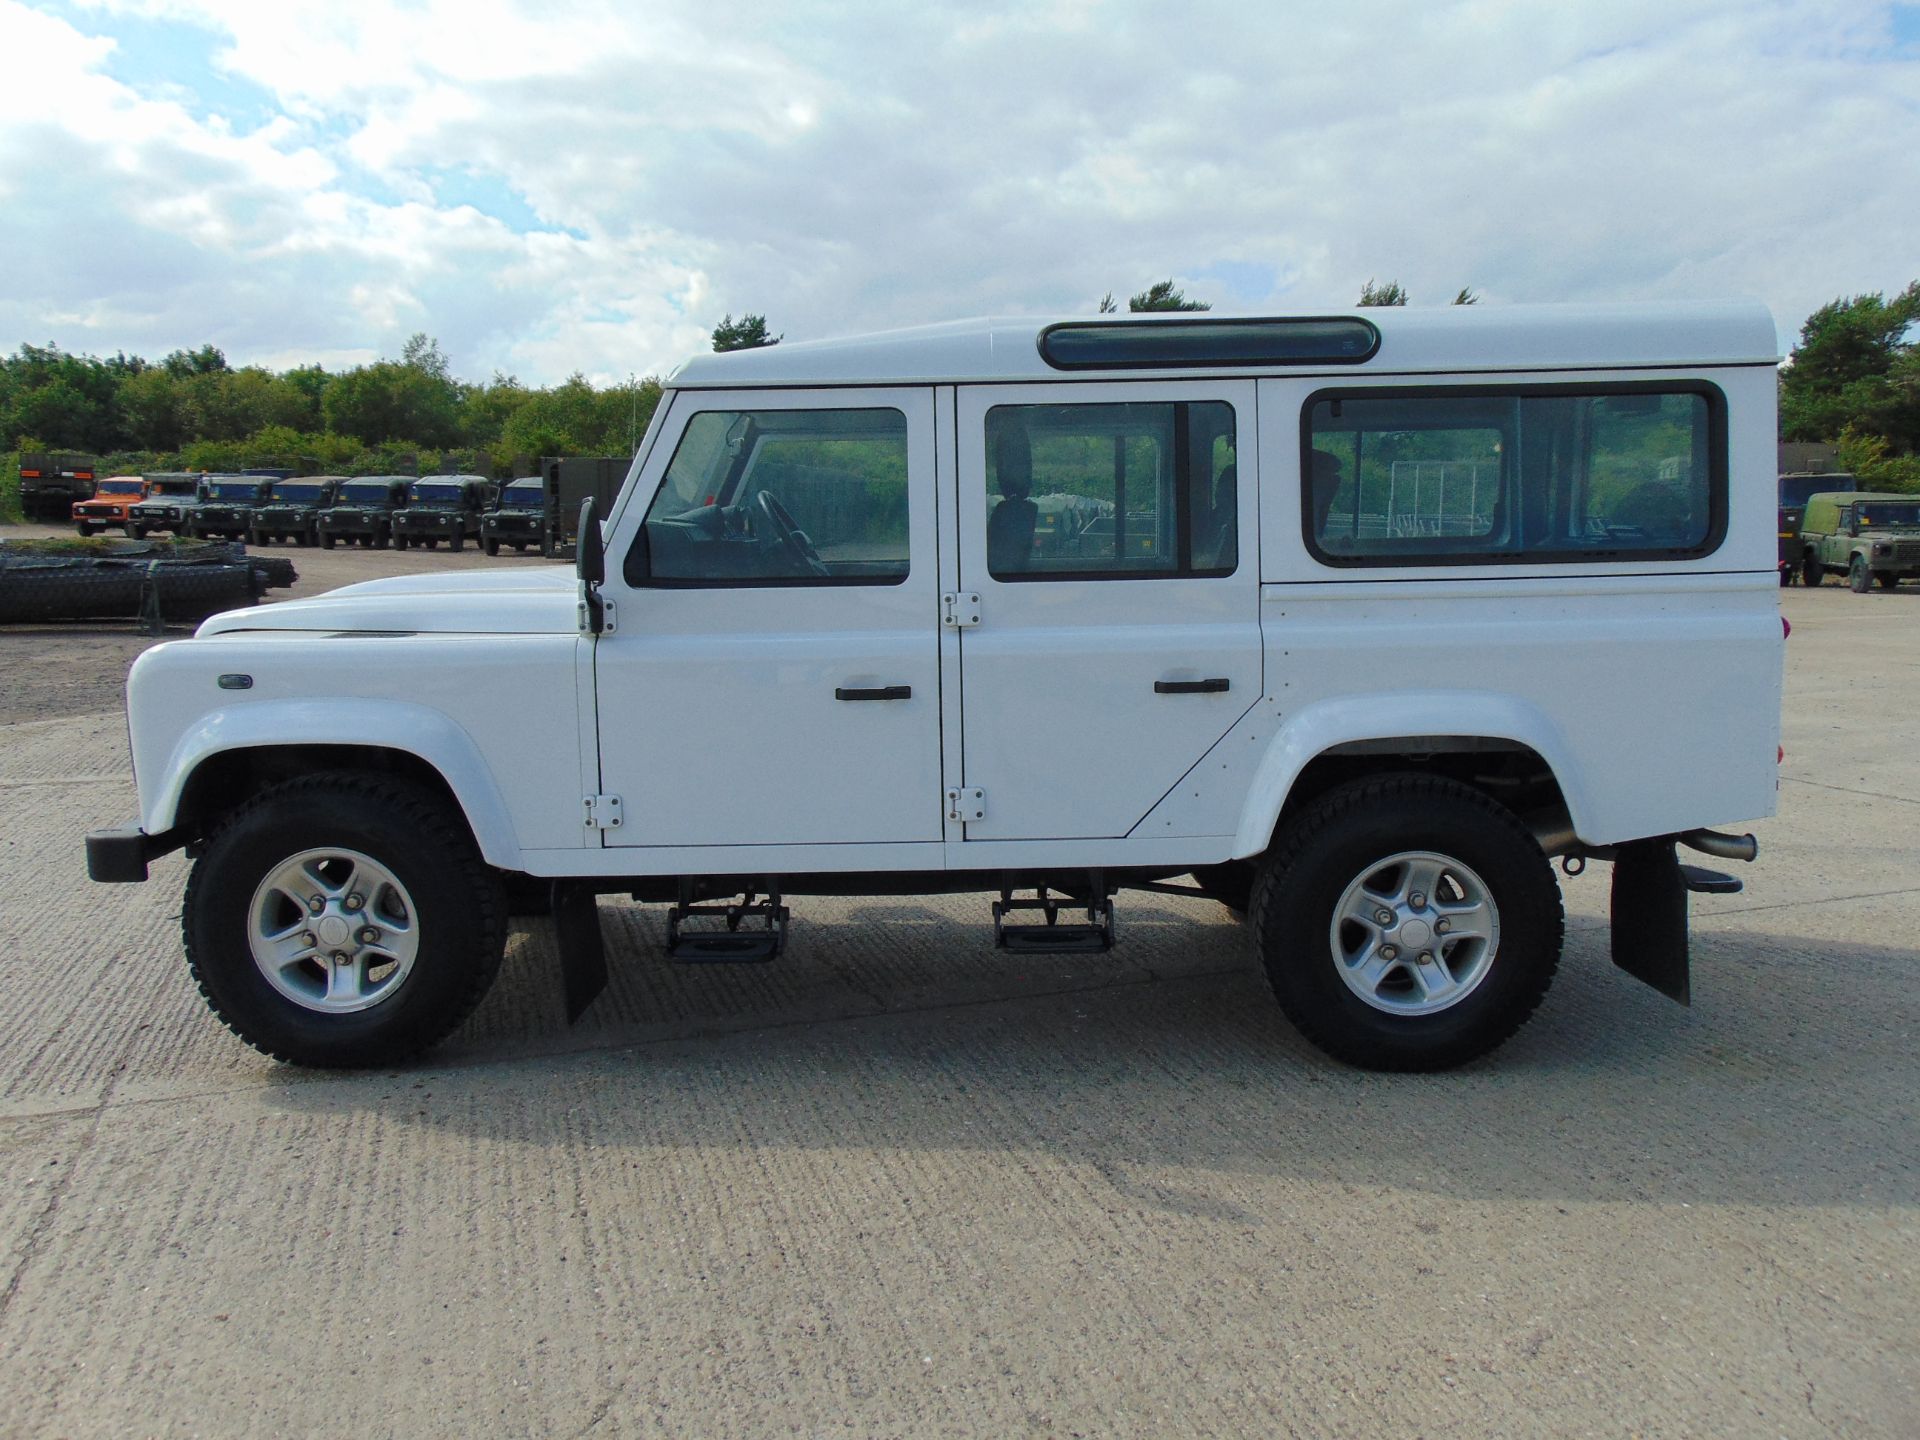 2015 Land Rover Defender 110 5 Door County Station Wagon ONLY 8,712 Miles!!! - Image 4 of 26